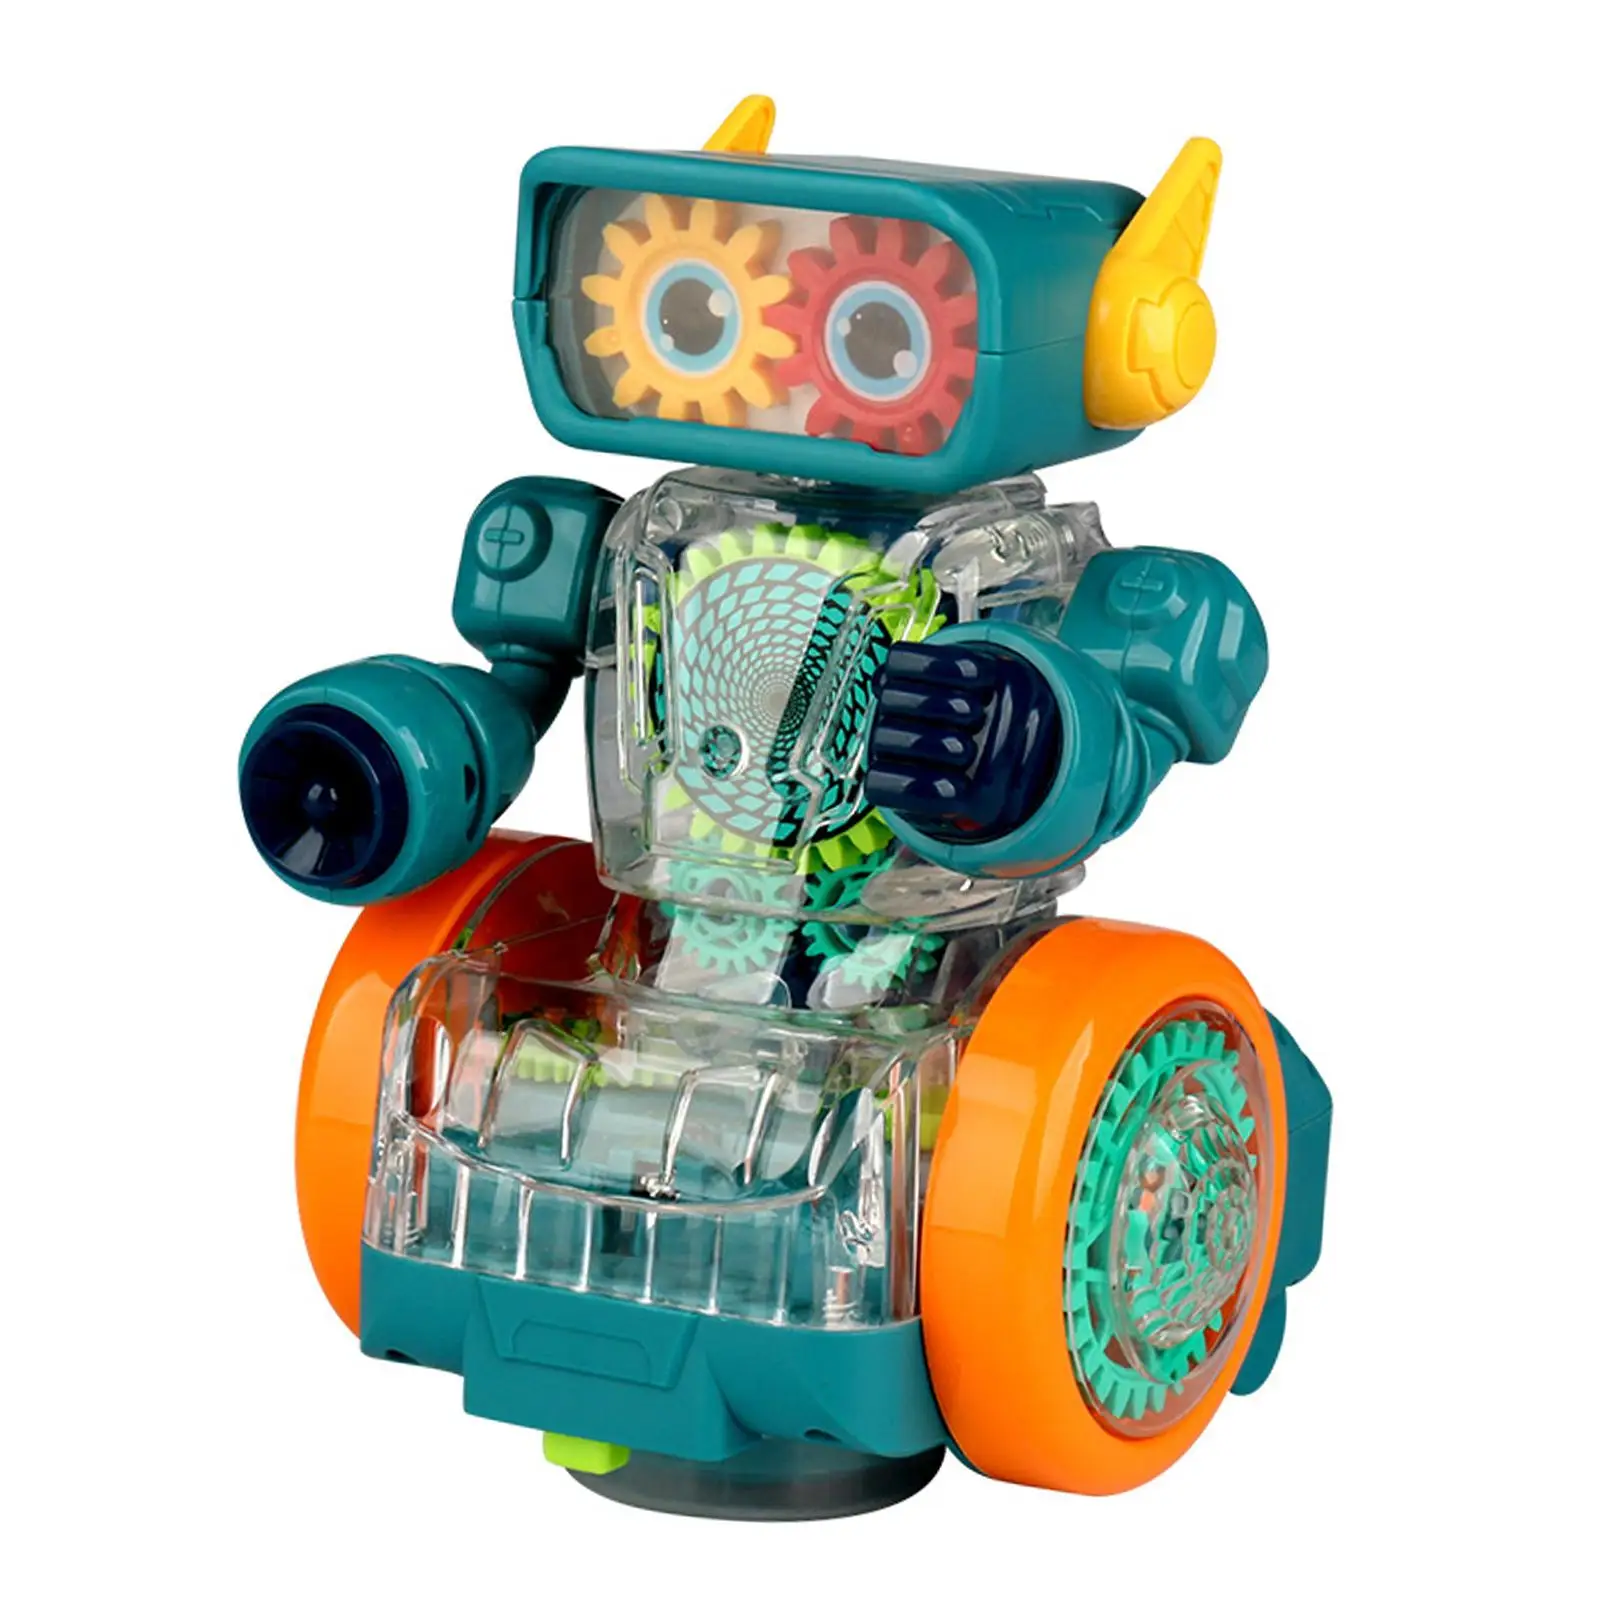 Transparent Mechanical Gear Robot Toy with Lighting Gear Toy for Kids